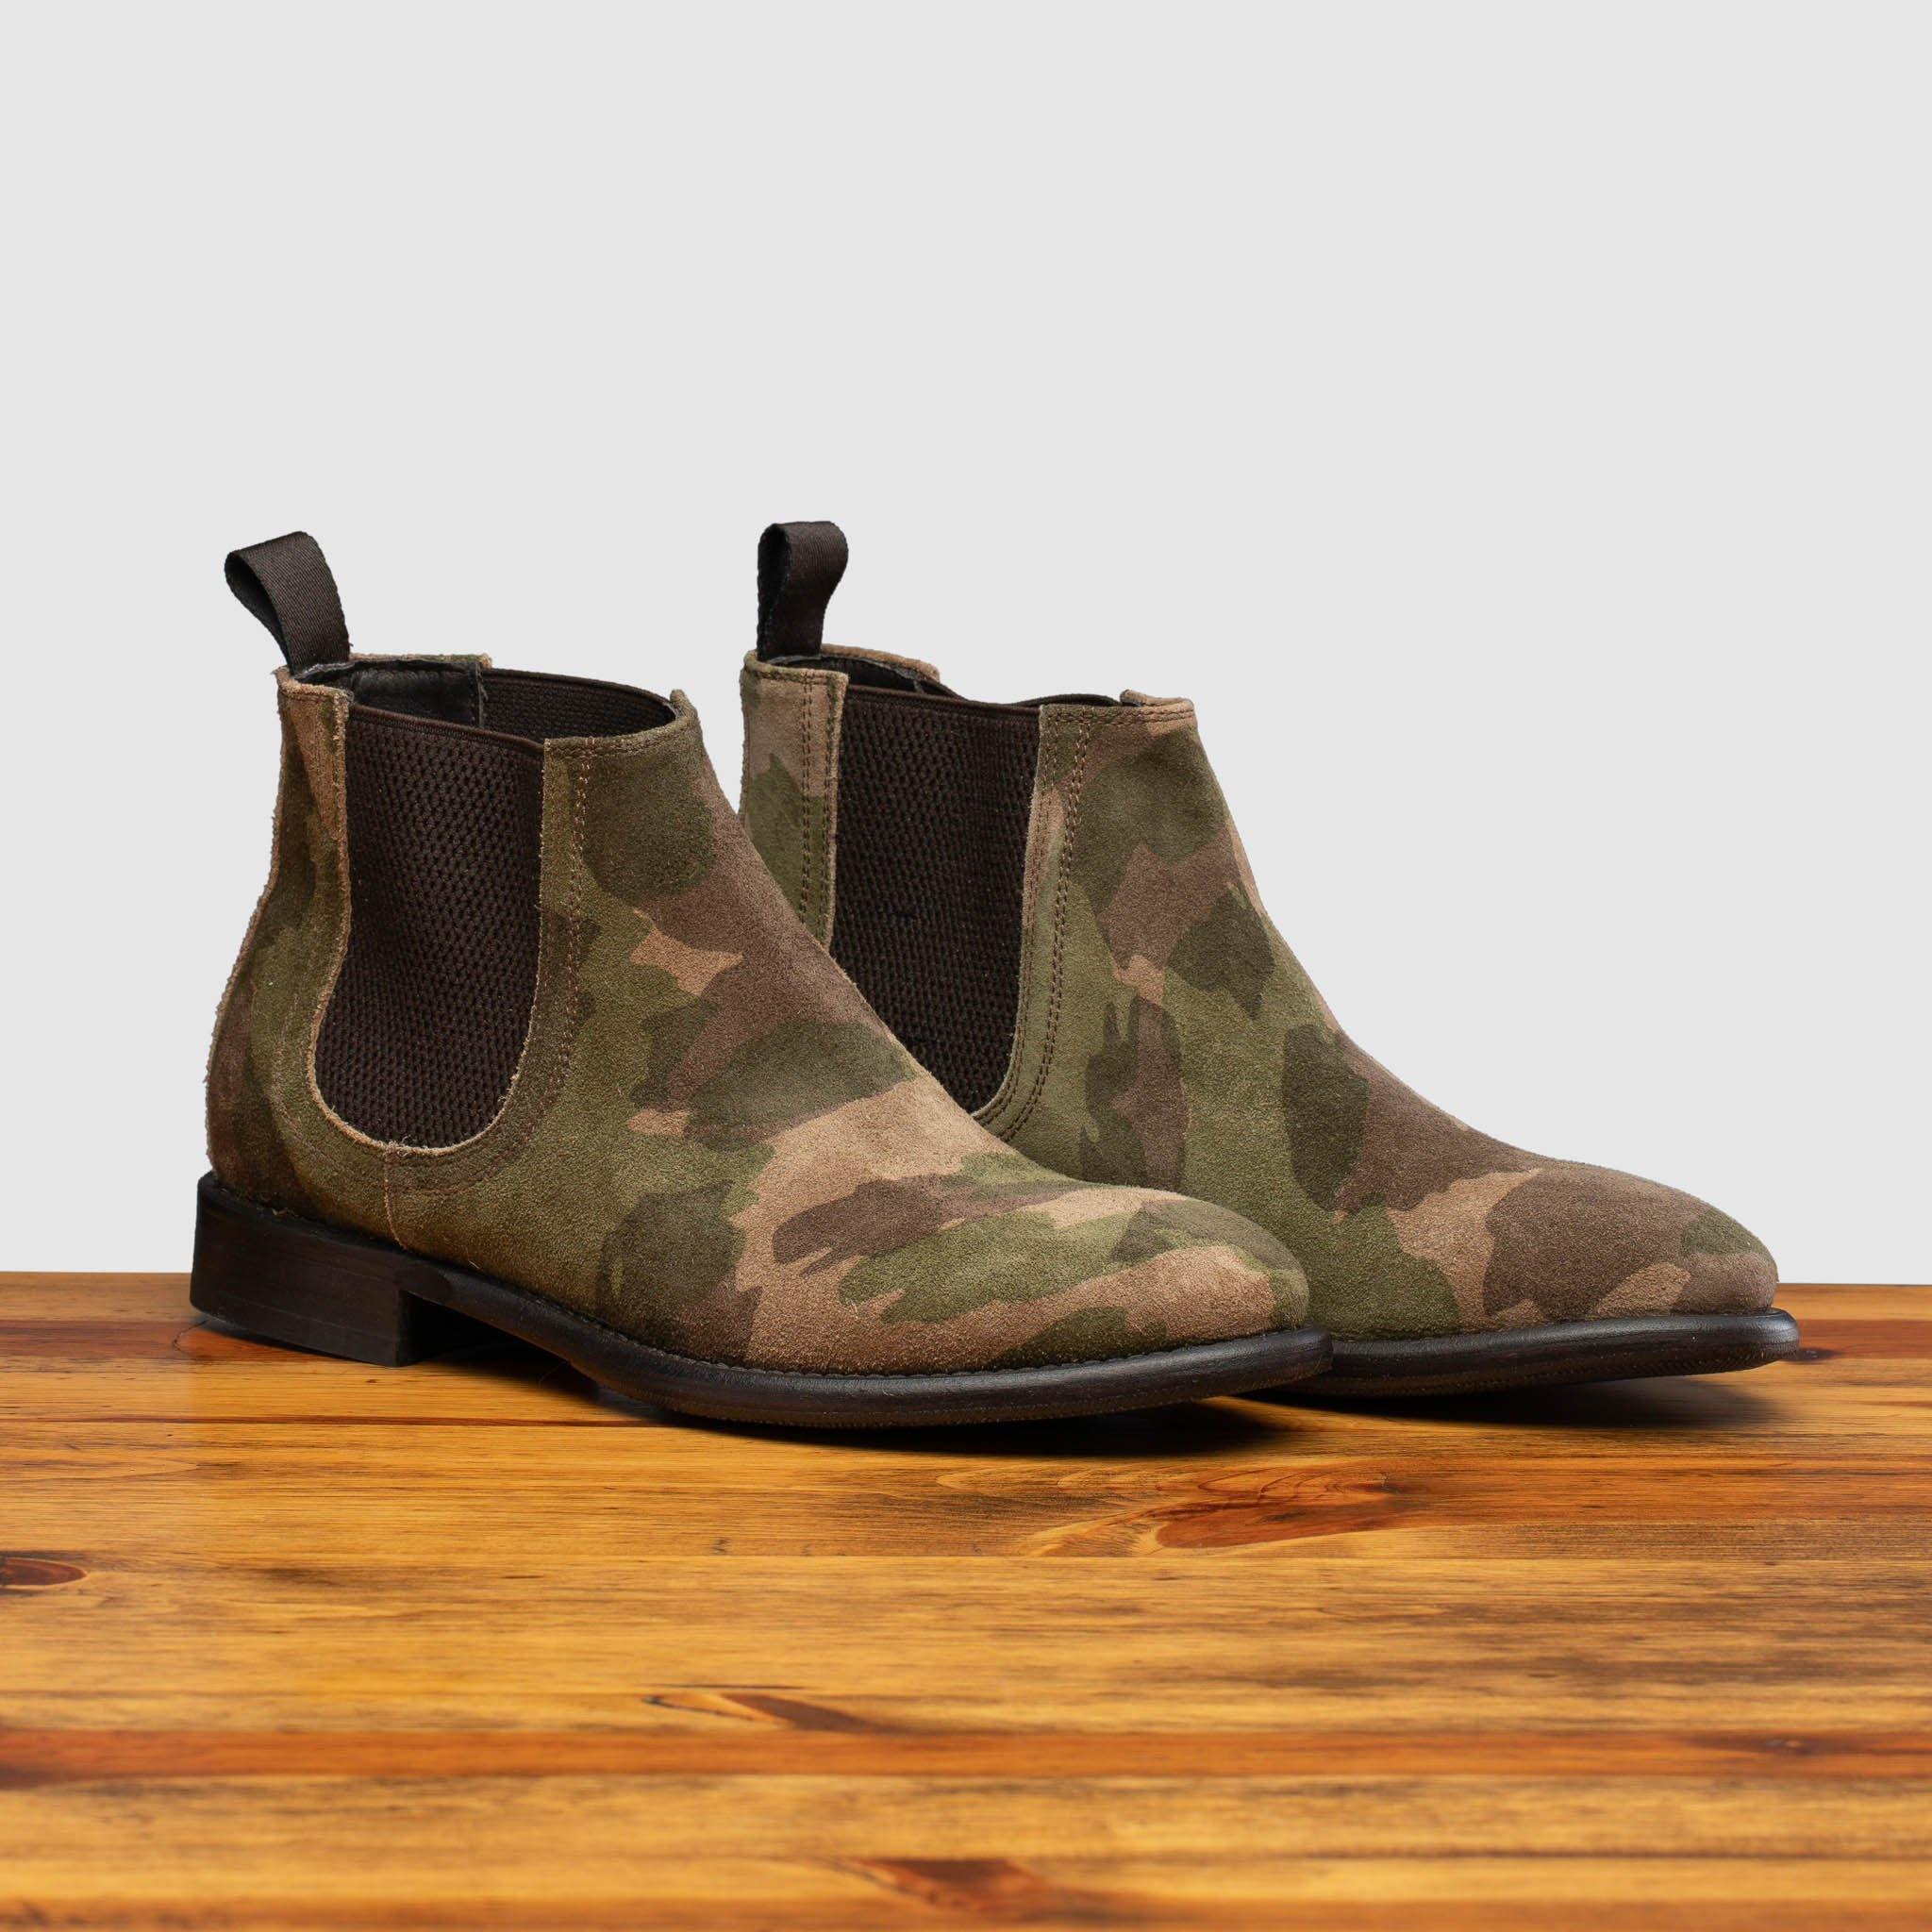 Pair of D681 Calzoleria Toscana Posta Donna Boot in Camoflauge on top of a wooden table